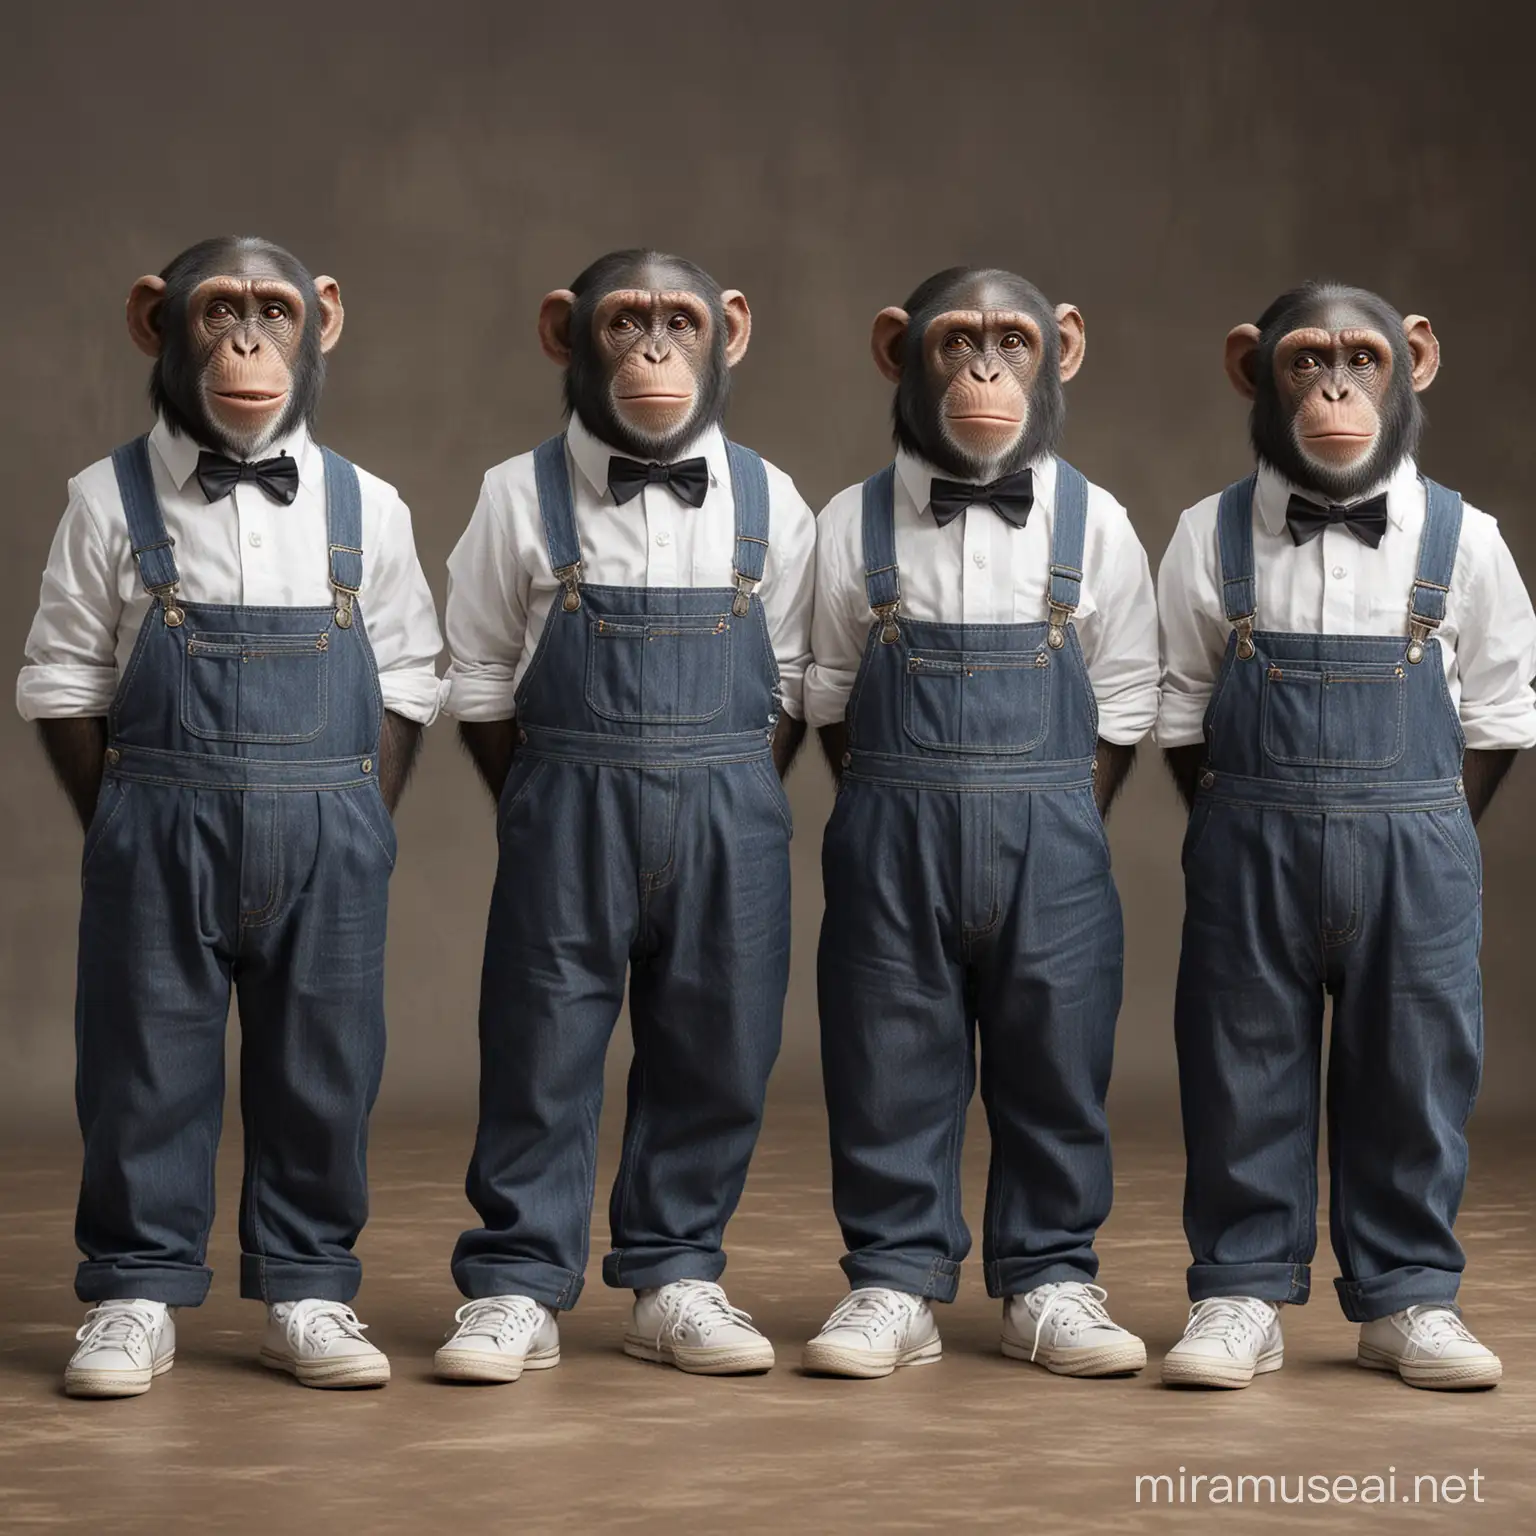 4 standing chimpanzees wearing overalls with white sneakers and bow ties, looking at camera, high quality, rich in details